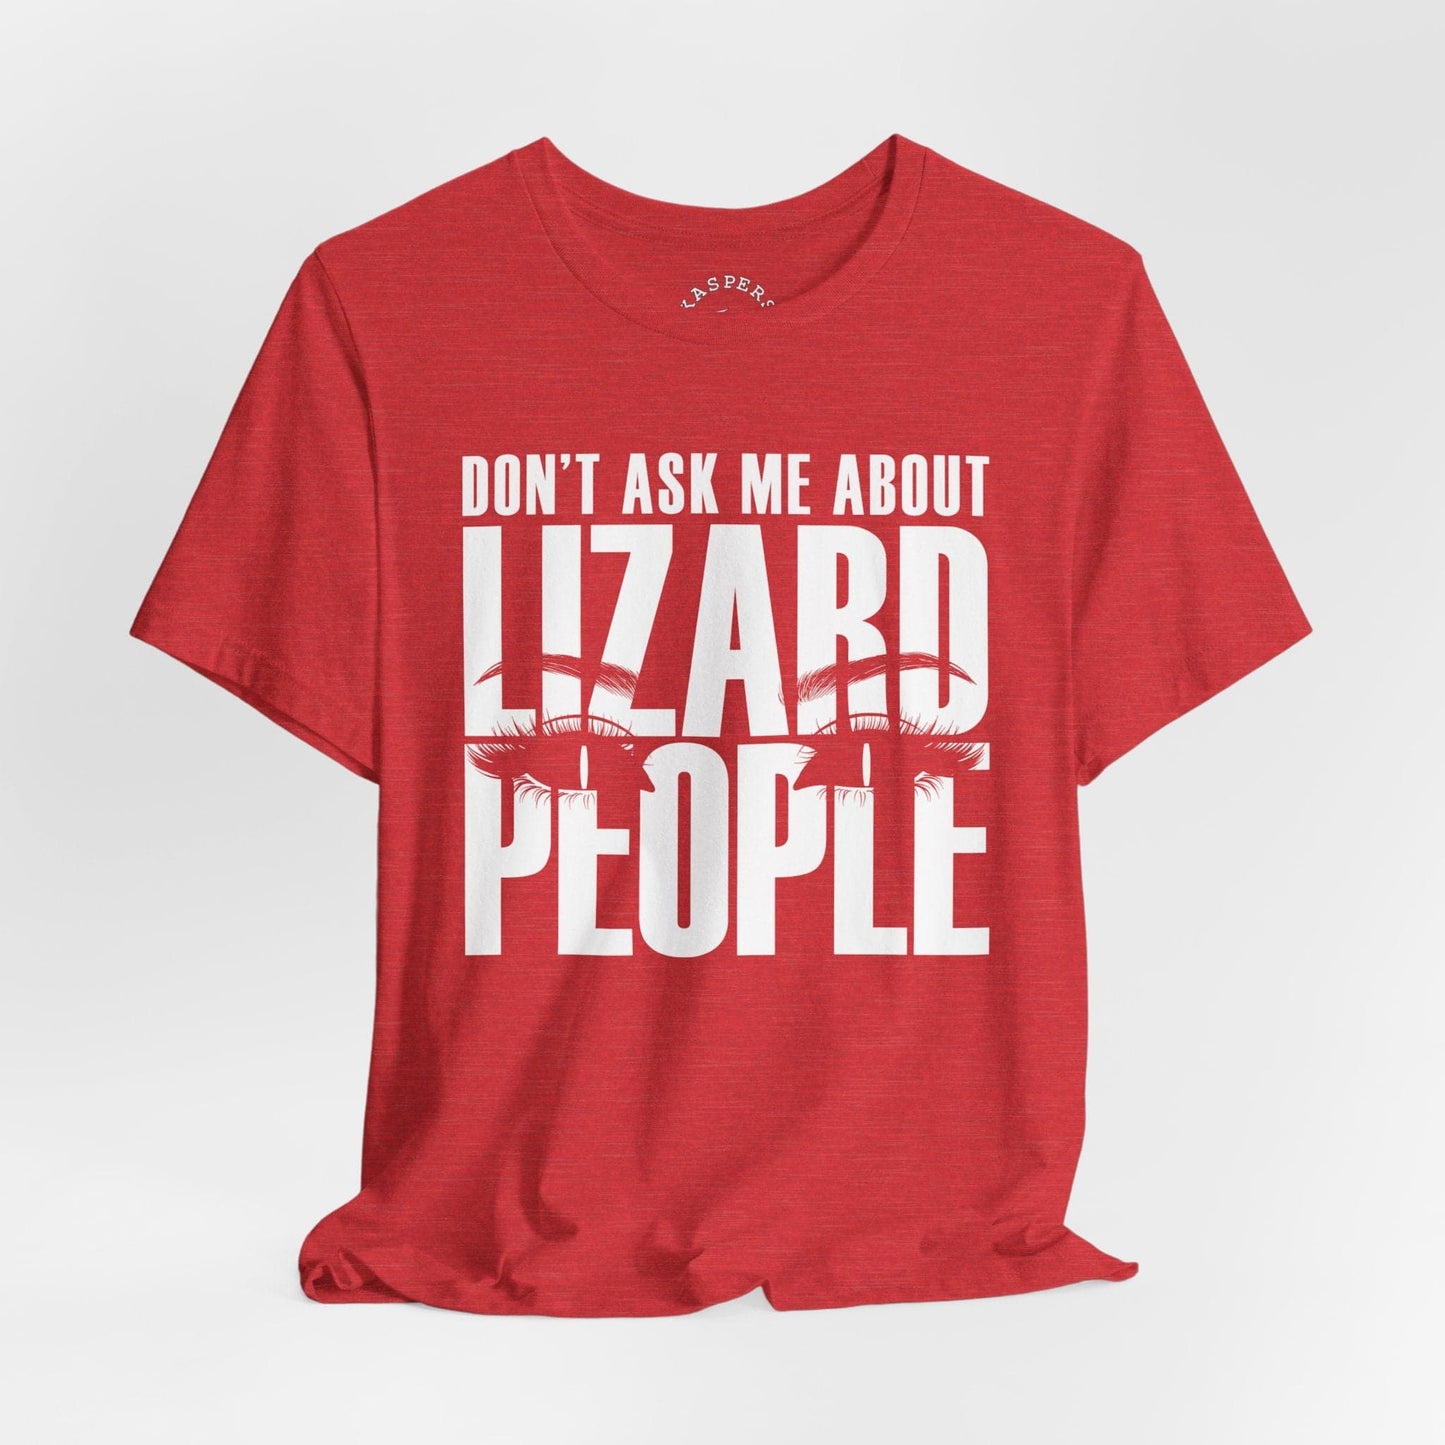 Don't Ask Me About Lizard People T-Shirt